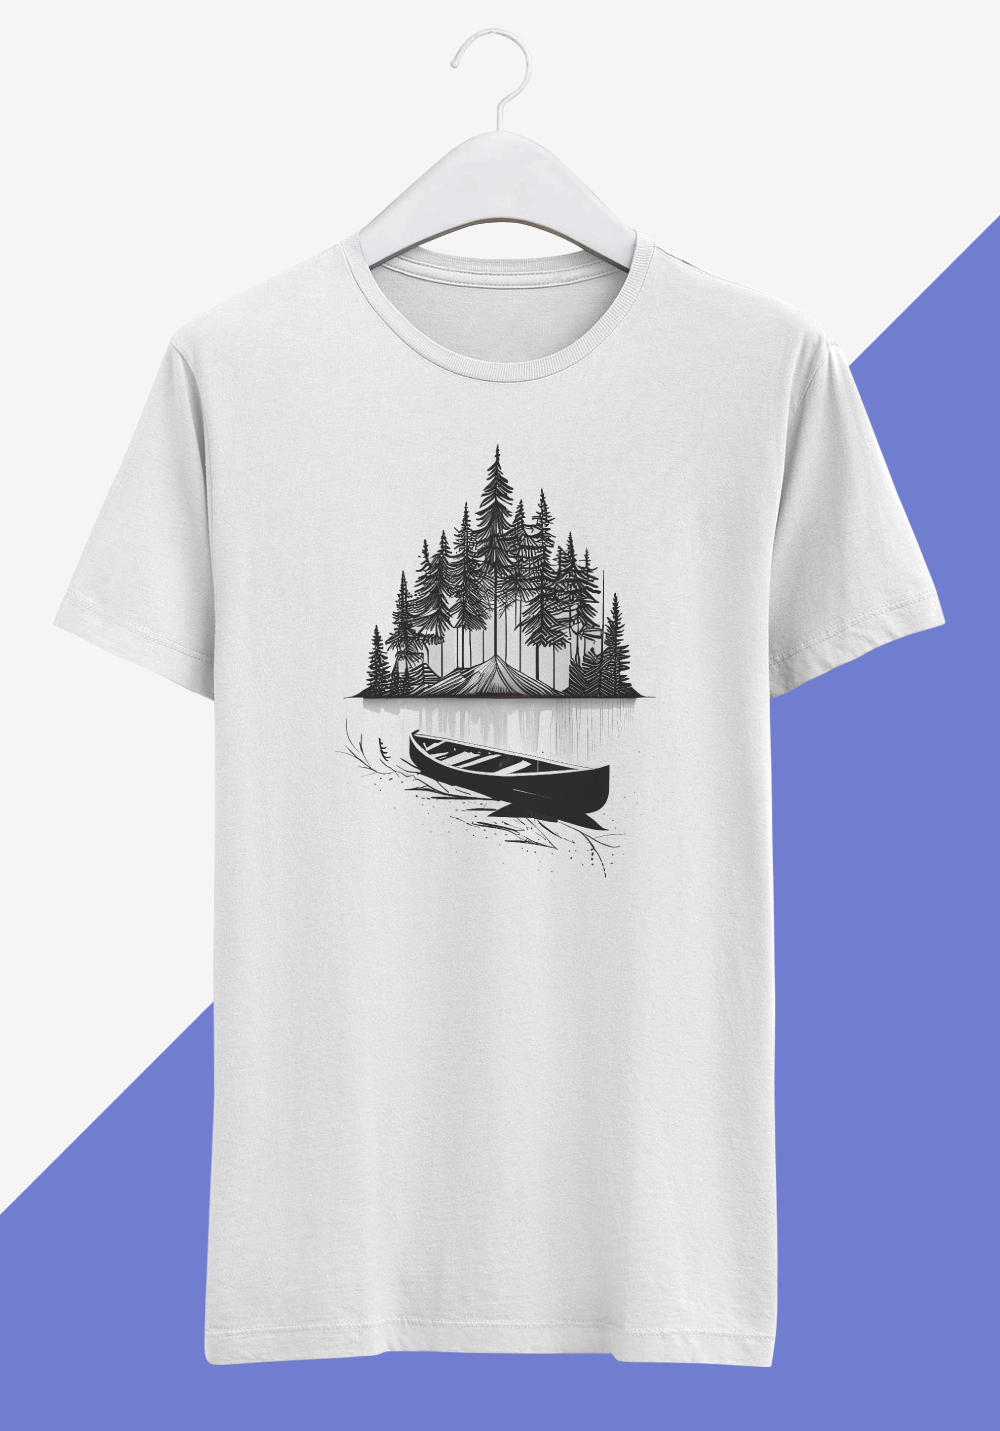 black-t-shirt-cool-graphic-for-men-minimalist-boat-by-mysterious-island